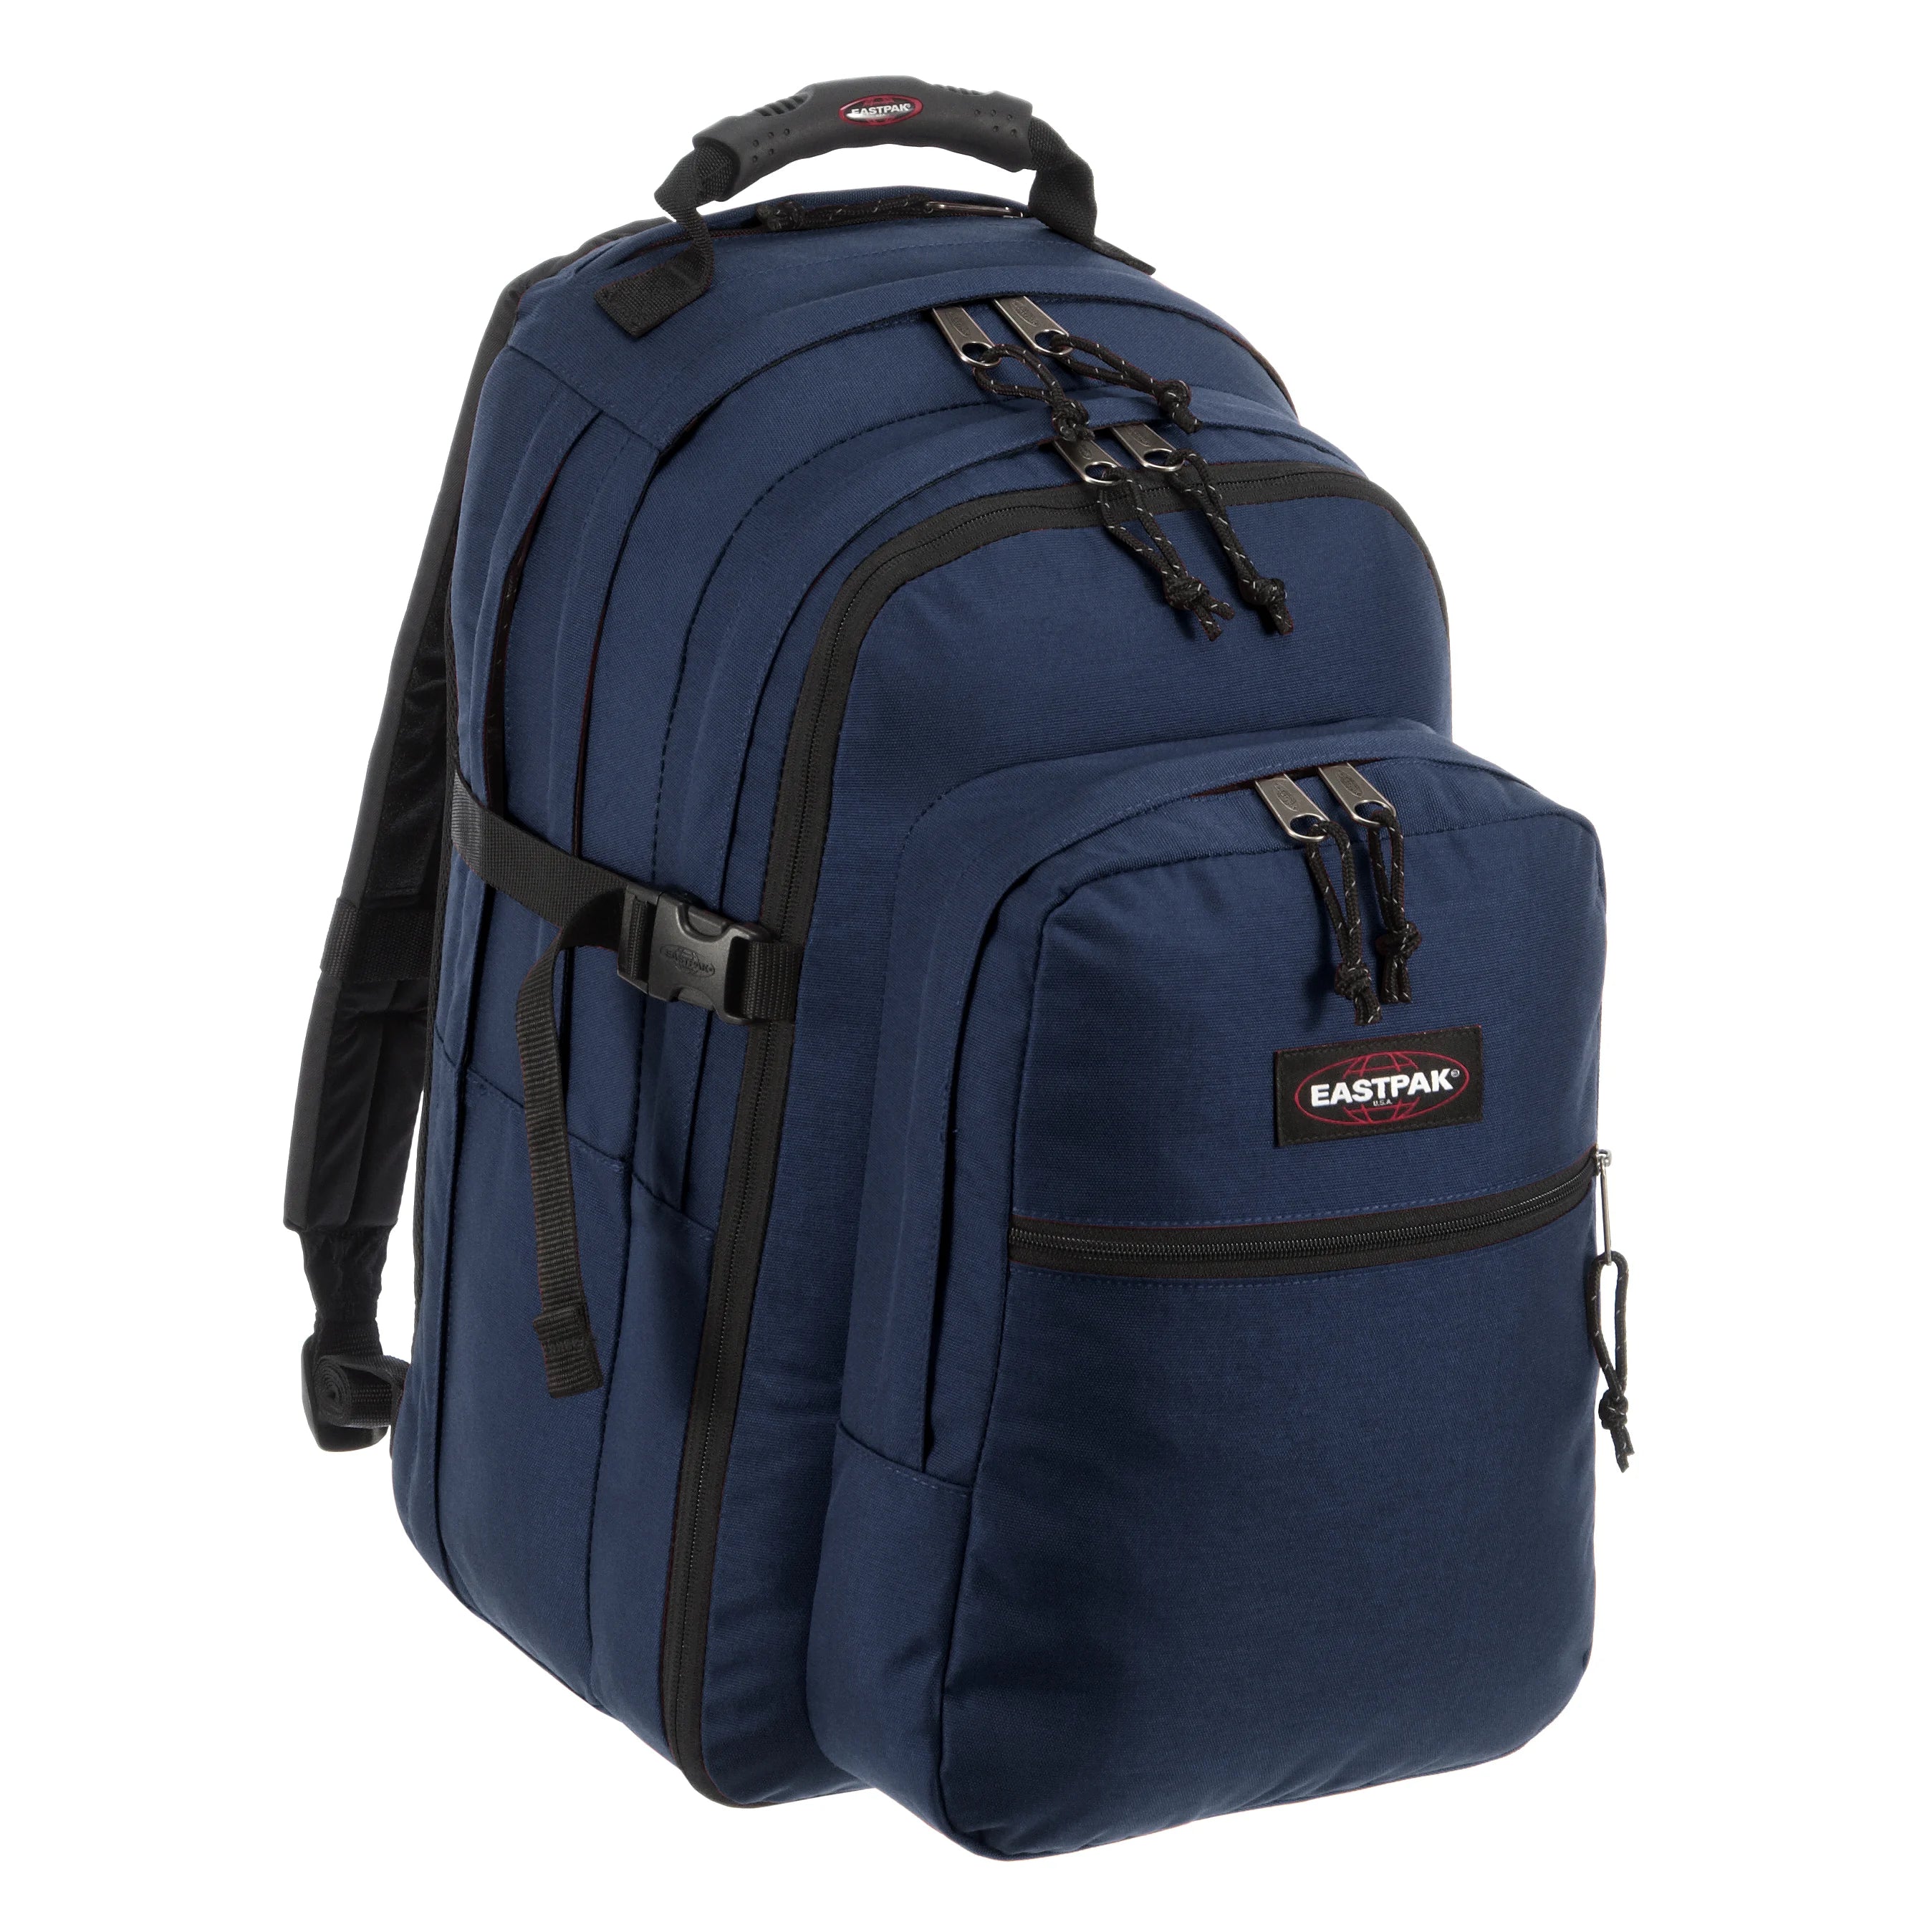 Eastpak Authentic Re-Check Tutor backpack with laptop compartment 48 cm - cloud navy